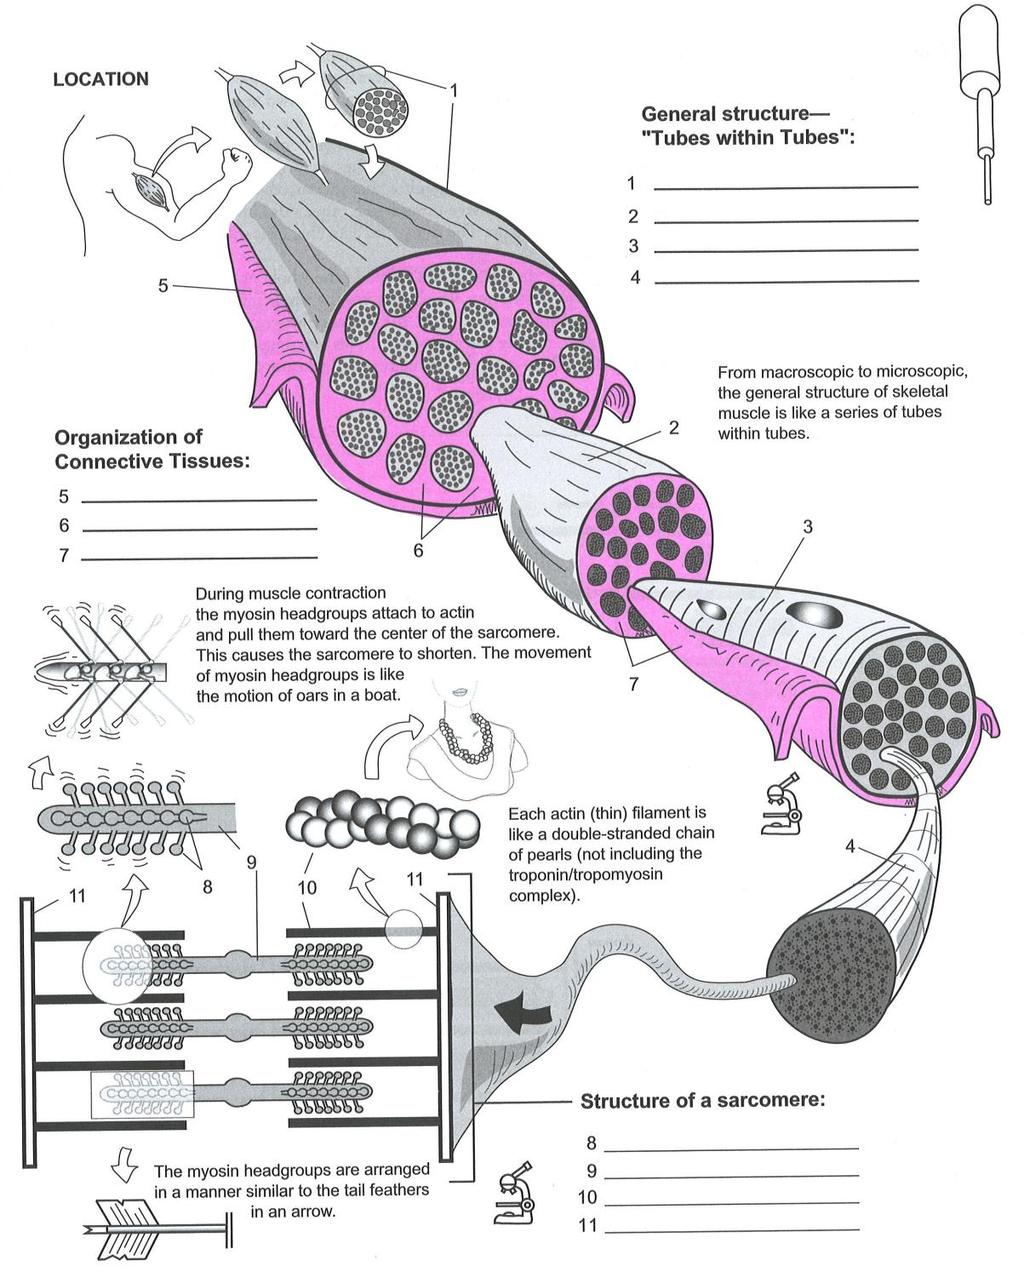 The Sliding Filament Theory Model 1: Muscle Histology Review How do muscle cells contract?